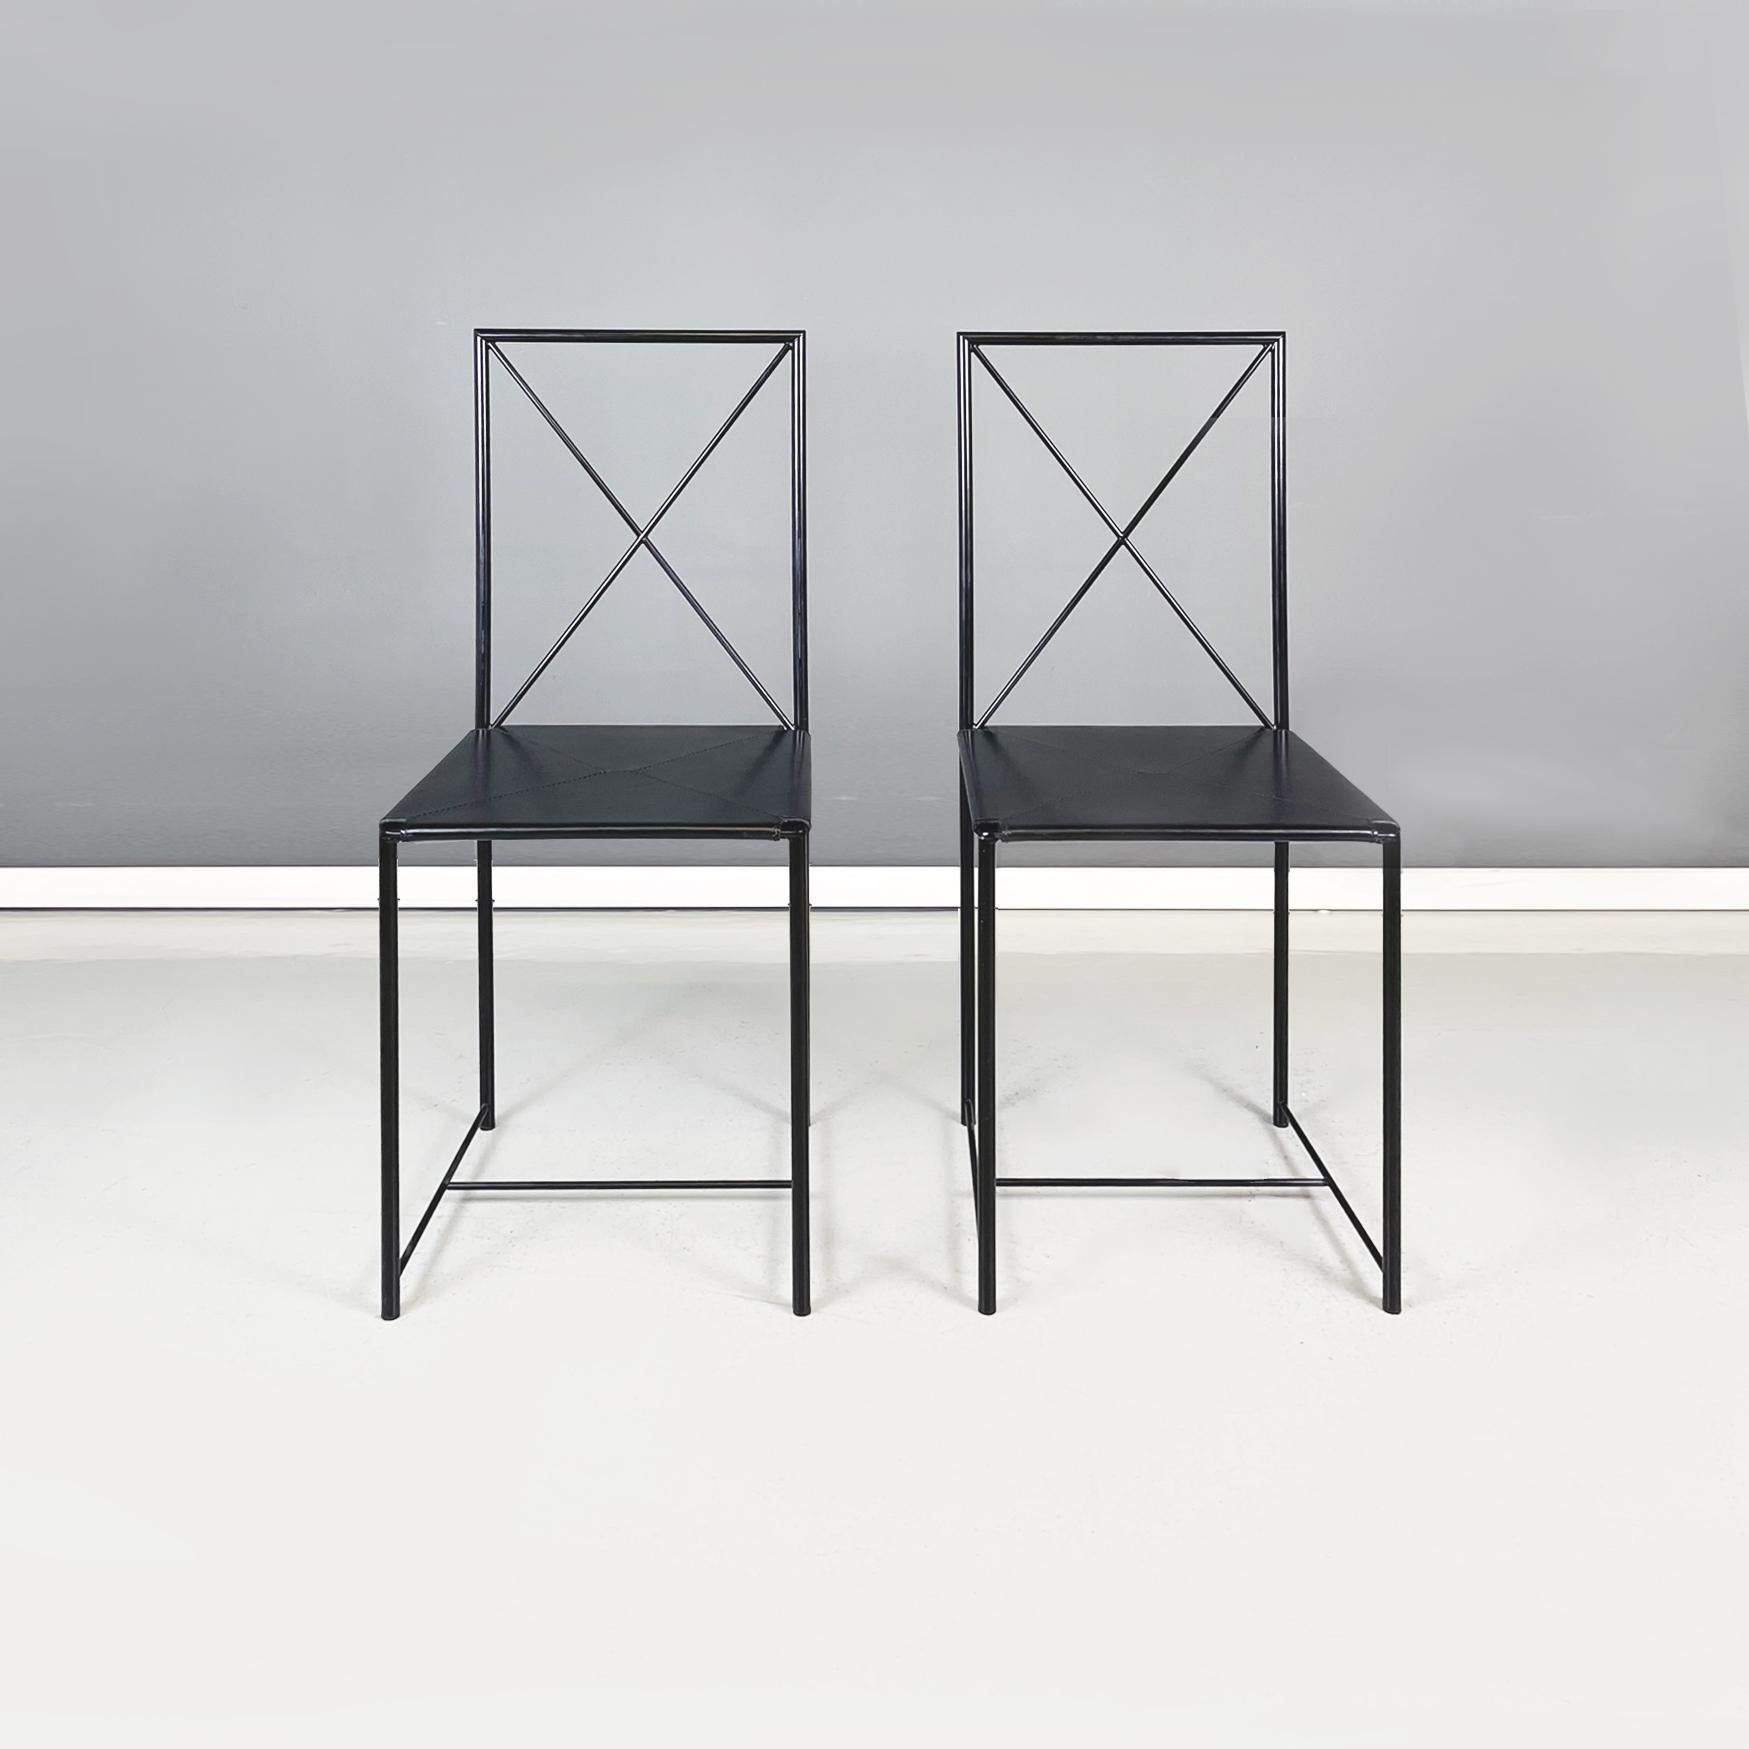 Italian modern Black metal and leather Chairs Moka by Asnago and Vender for Flexoform, 1939
Pair of chairs mod. Moka with square seat in black leather, held taut by a series of elastic straps. The structure is entirely in black lacquered metal rod.